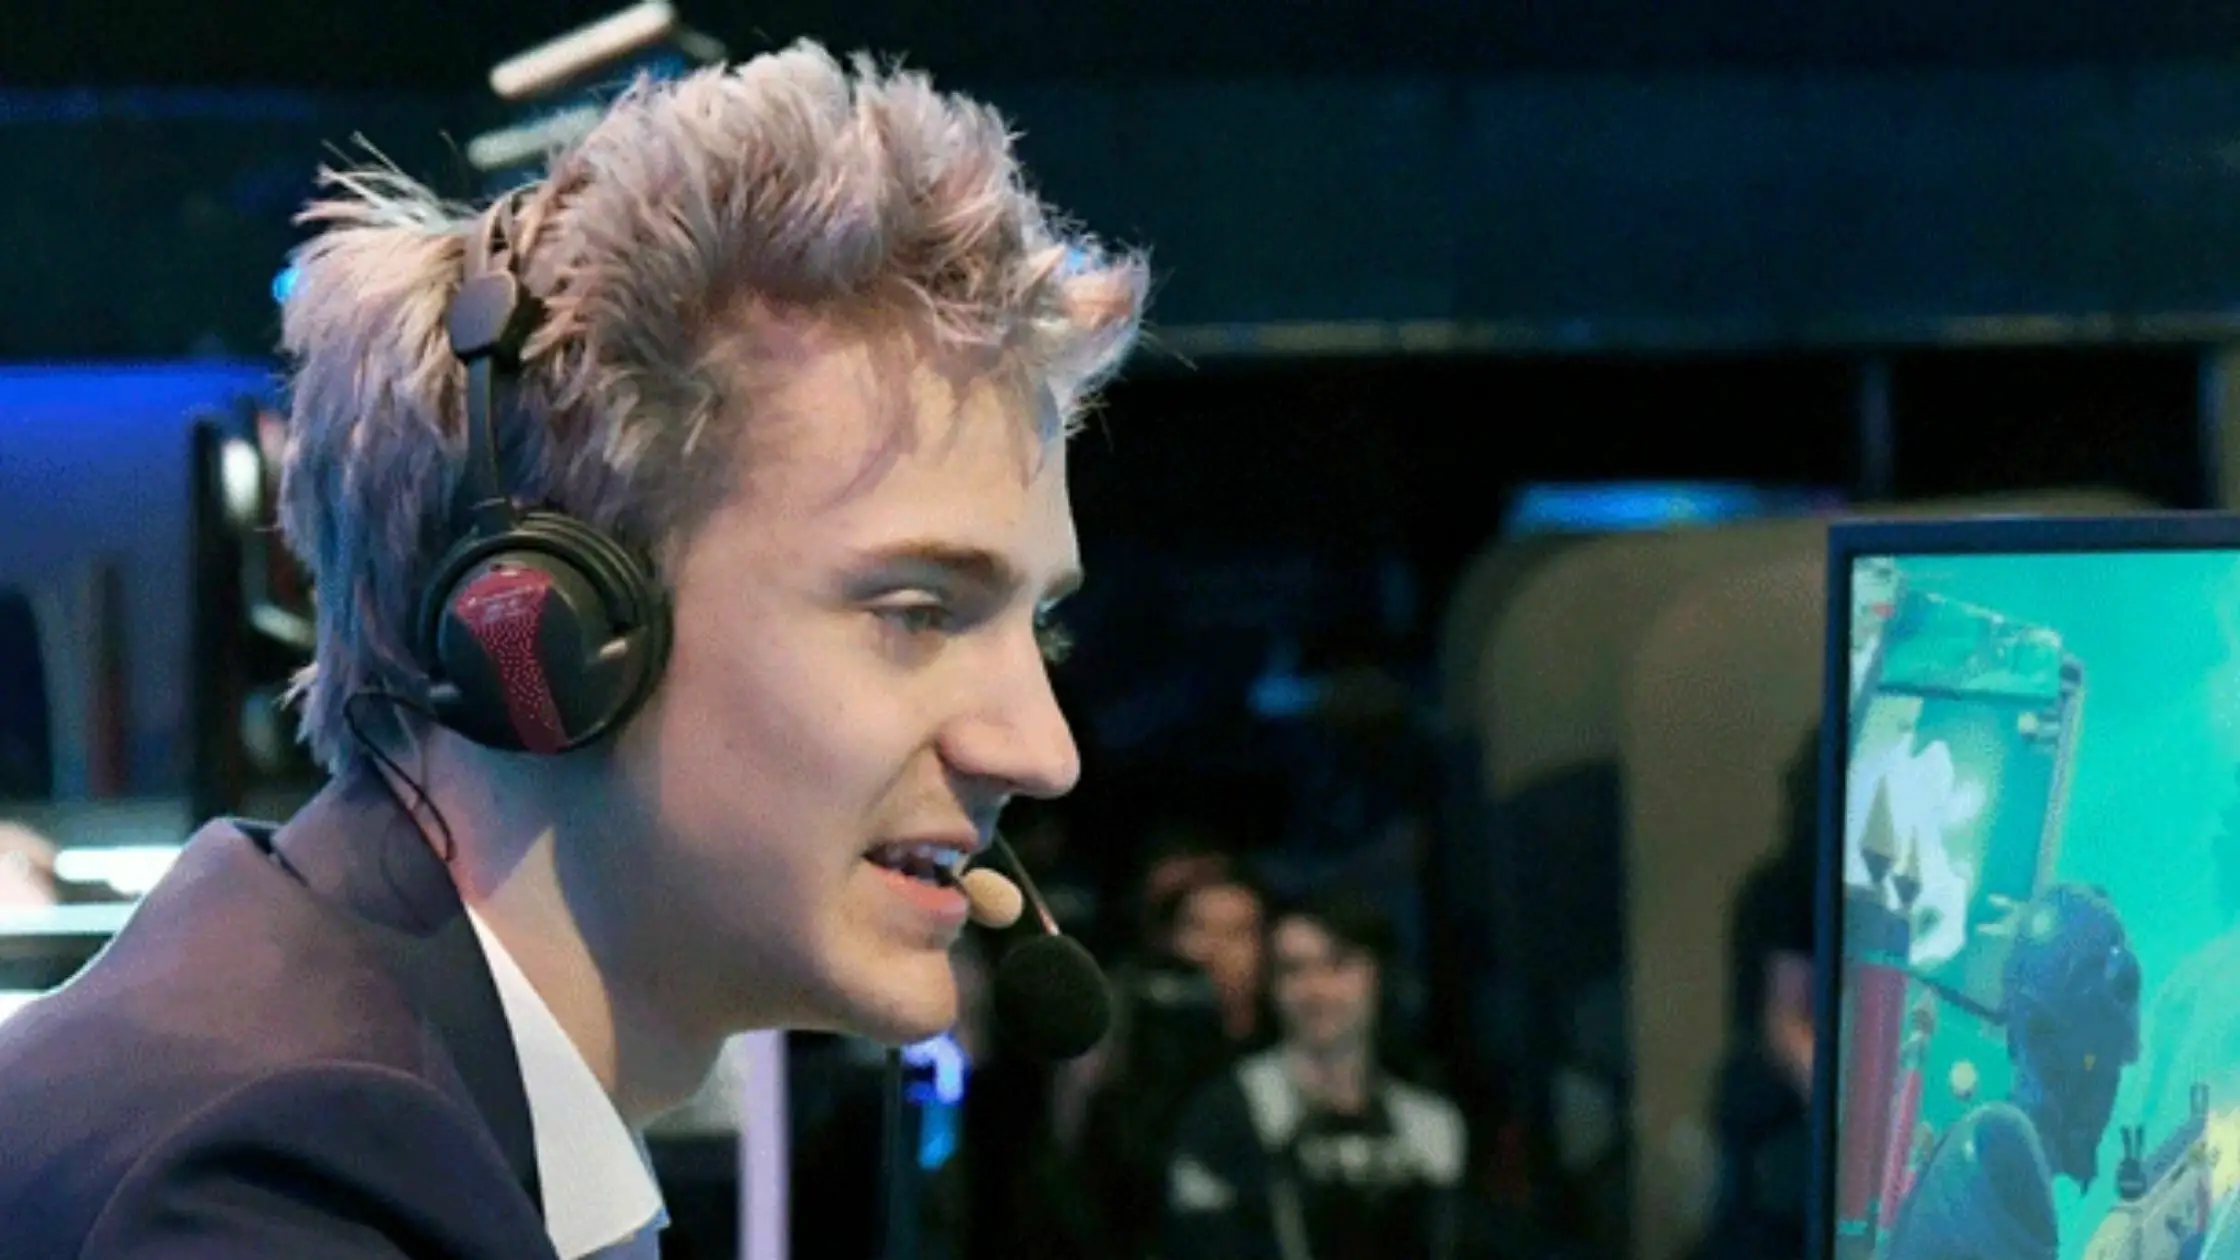 ninja-is-asking-parents-to-join-him-in-stopping-online-toxicity